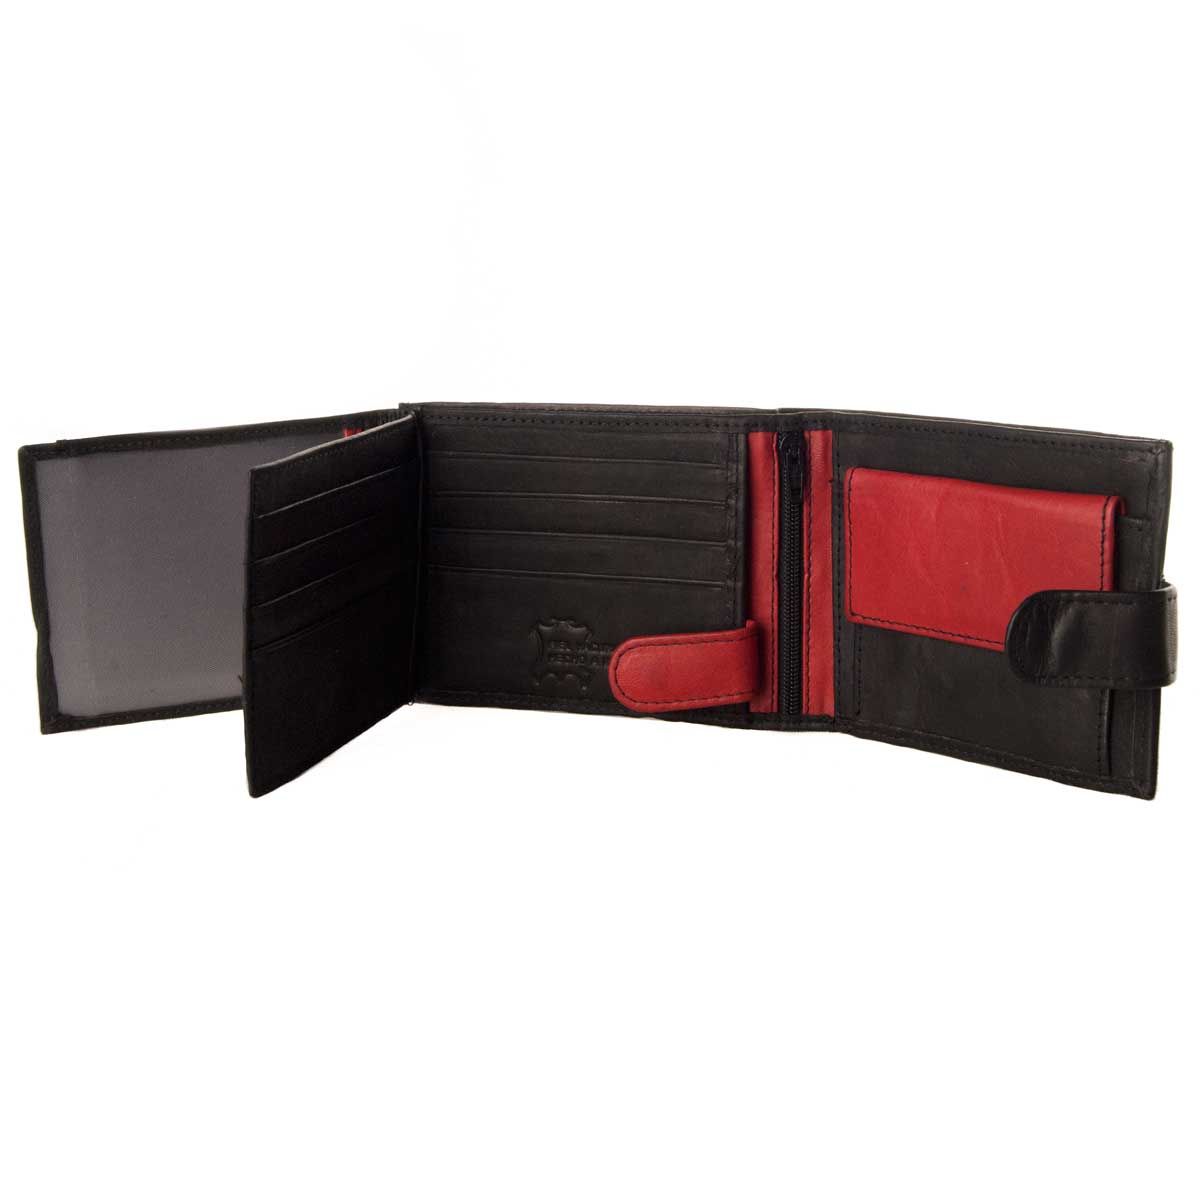 Collection Cáspula Emilio Faraoni. Measure: High 9.00 cm * Width 11.50 cm * Depth 2.00 cm. The material in which a man's portfolio is designed is essential. Quality skin is always an incentive when buying a portfolio, as it is a durable material, with soft and pleasant touch to sight. A correct distribution within the portfolio for men is fundamental. For all these reasons, we always offer men's wallets performed at 100% natural, pleasant touch, as this American portfolio of man with departments for tickets, cards and coins. Also contains inner zipper and another section with departments to store more cards. Elegant, practical and comfortable with a reduced size to comfortably carry in the jackets or in the same pockets of the shirts. Made in Spain.